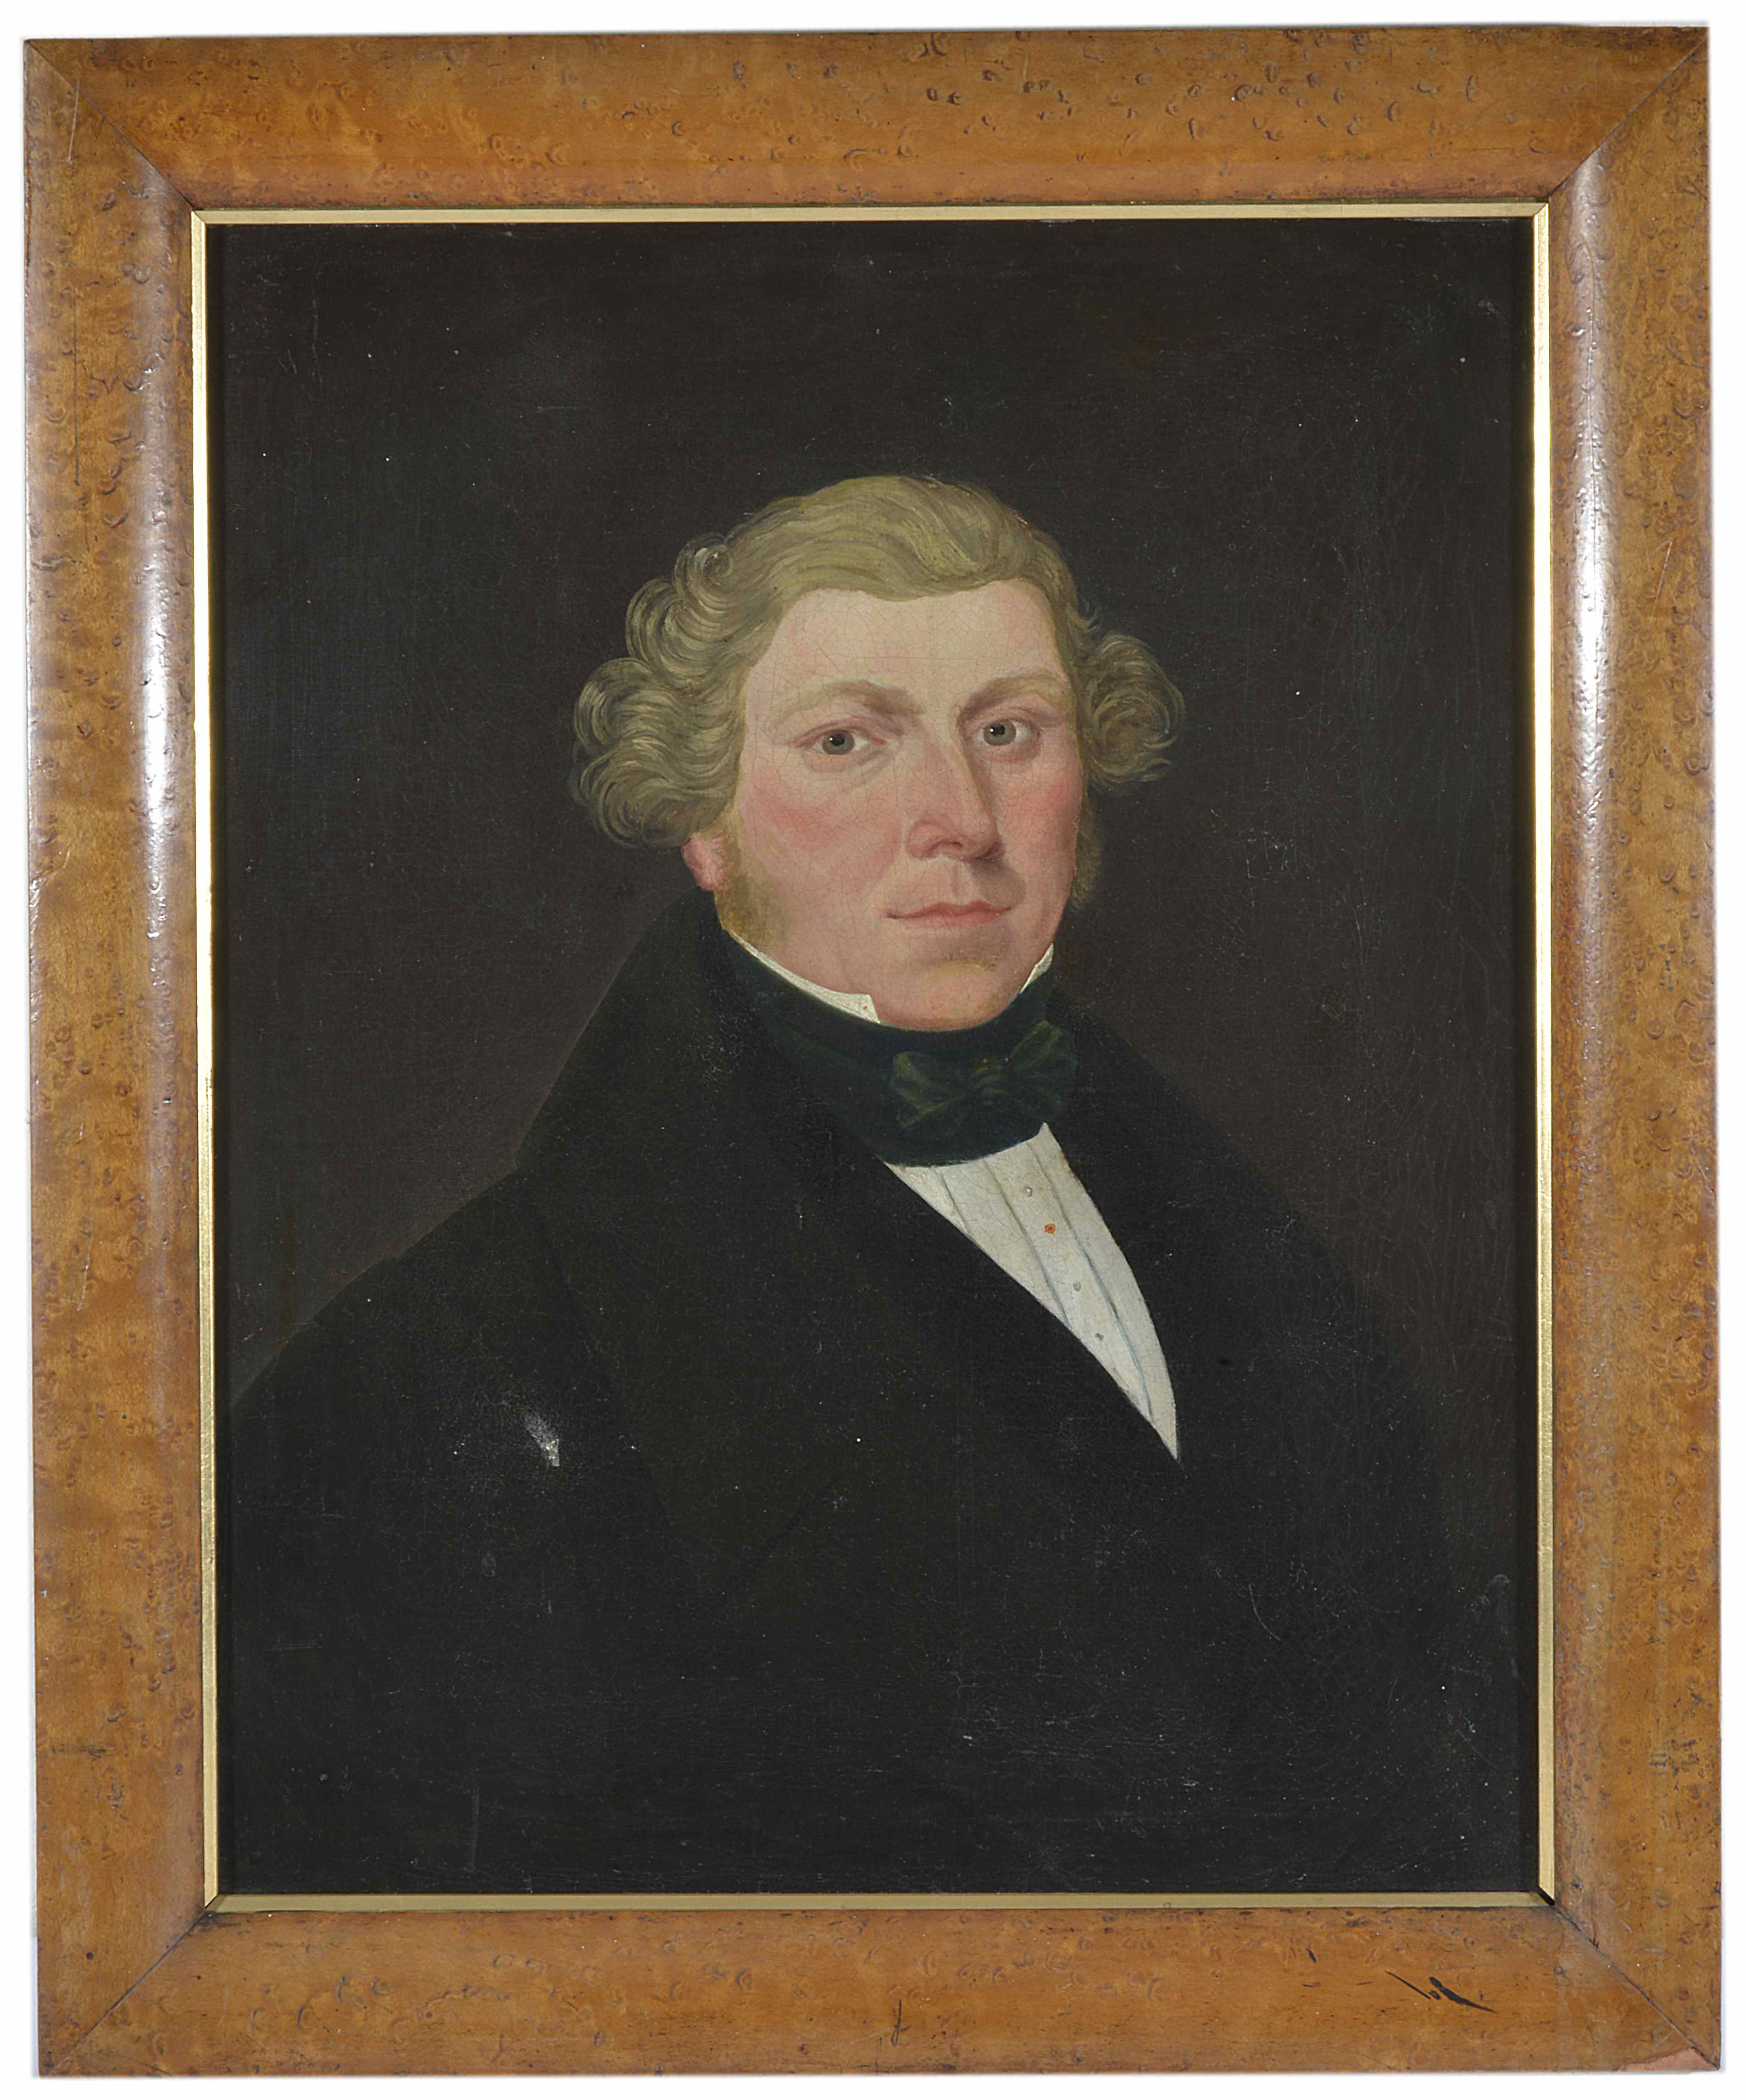 English School, circa 1830
'Portrait of a gentleman wearing a bow tie', oil on canvasDimensions: